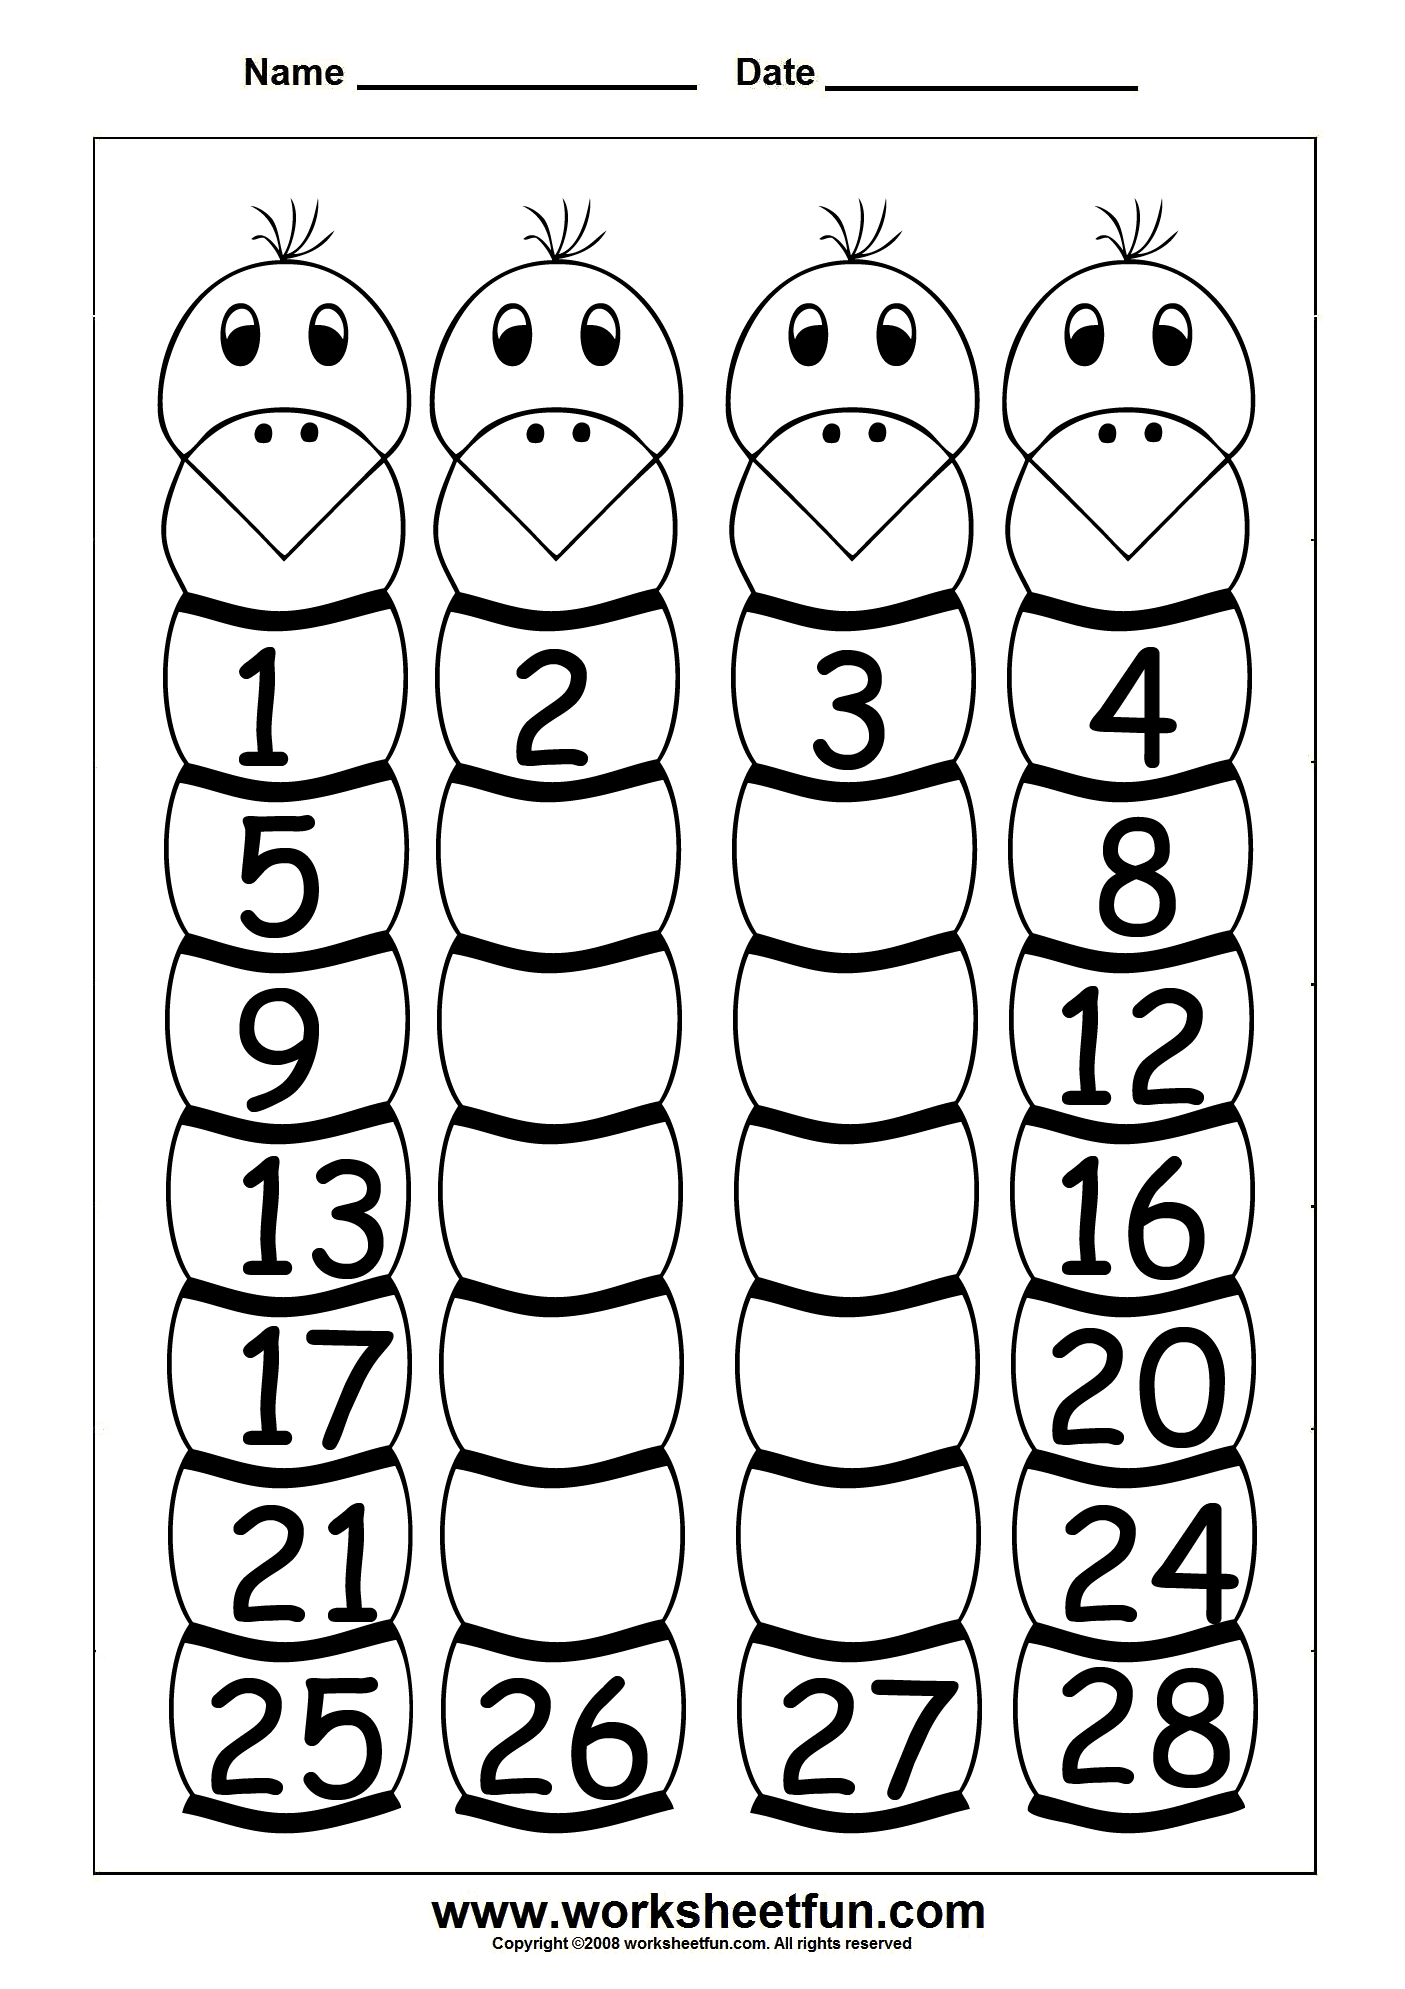 14 Best Images of Sequencing Writing Worksheets - Preschool Snowman